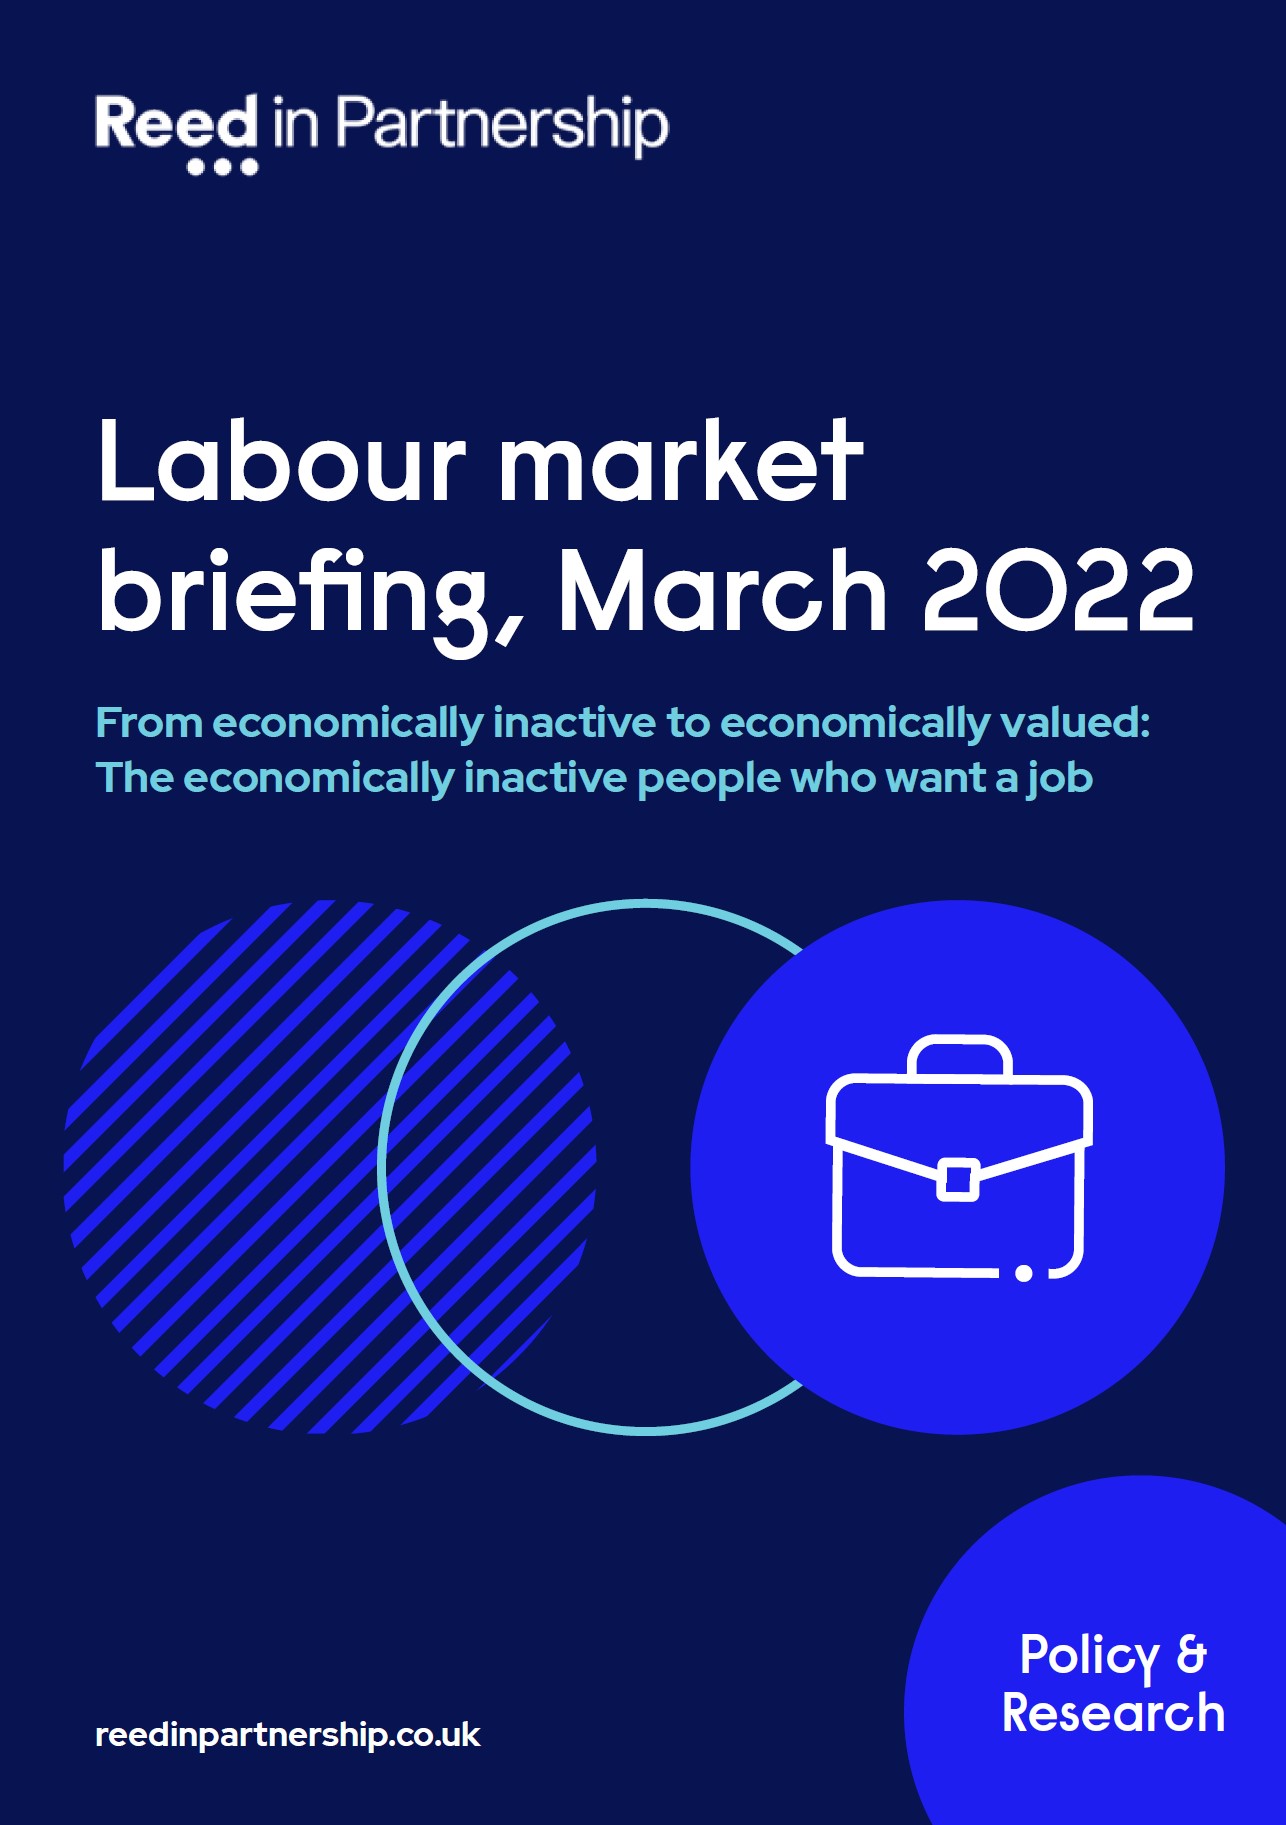 From economically “inactive” to economically valued - March 2022